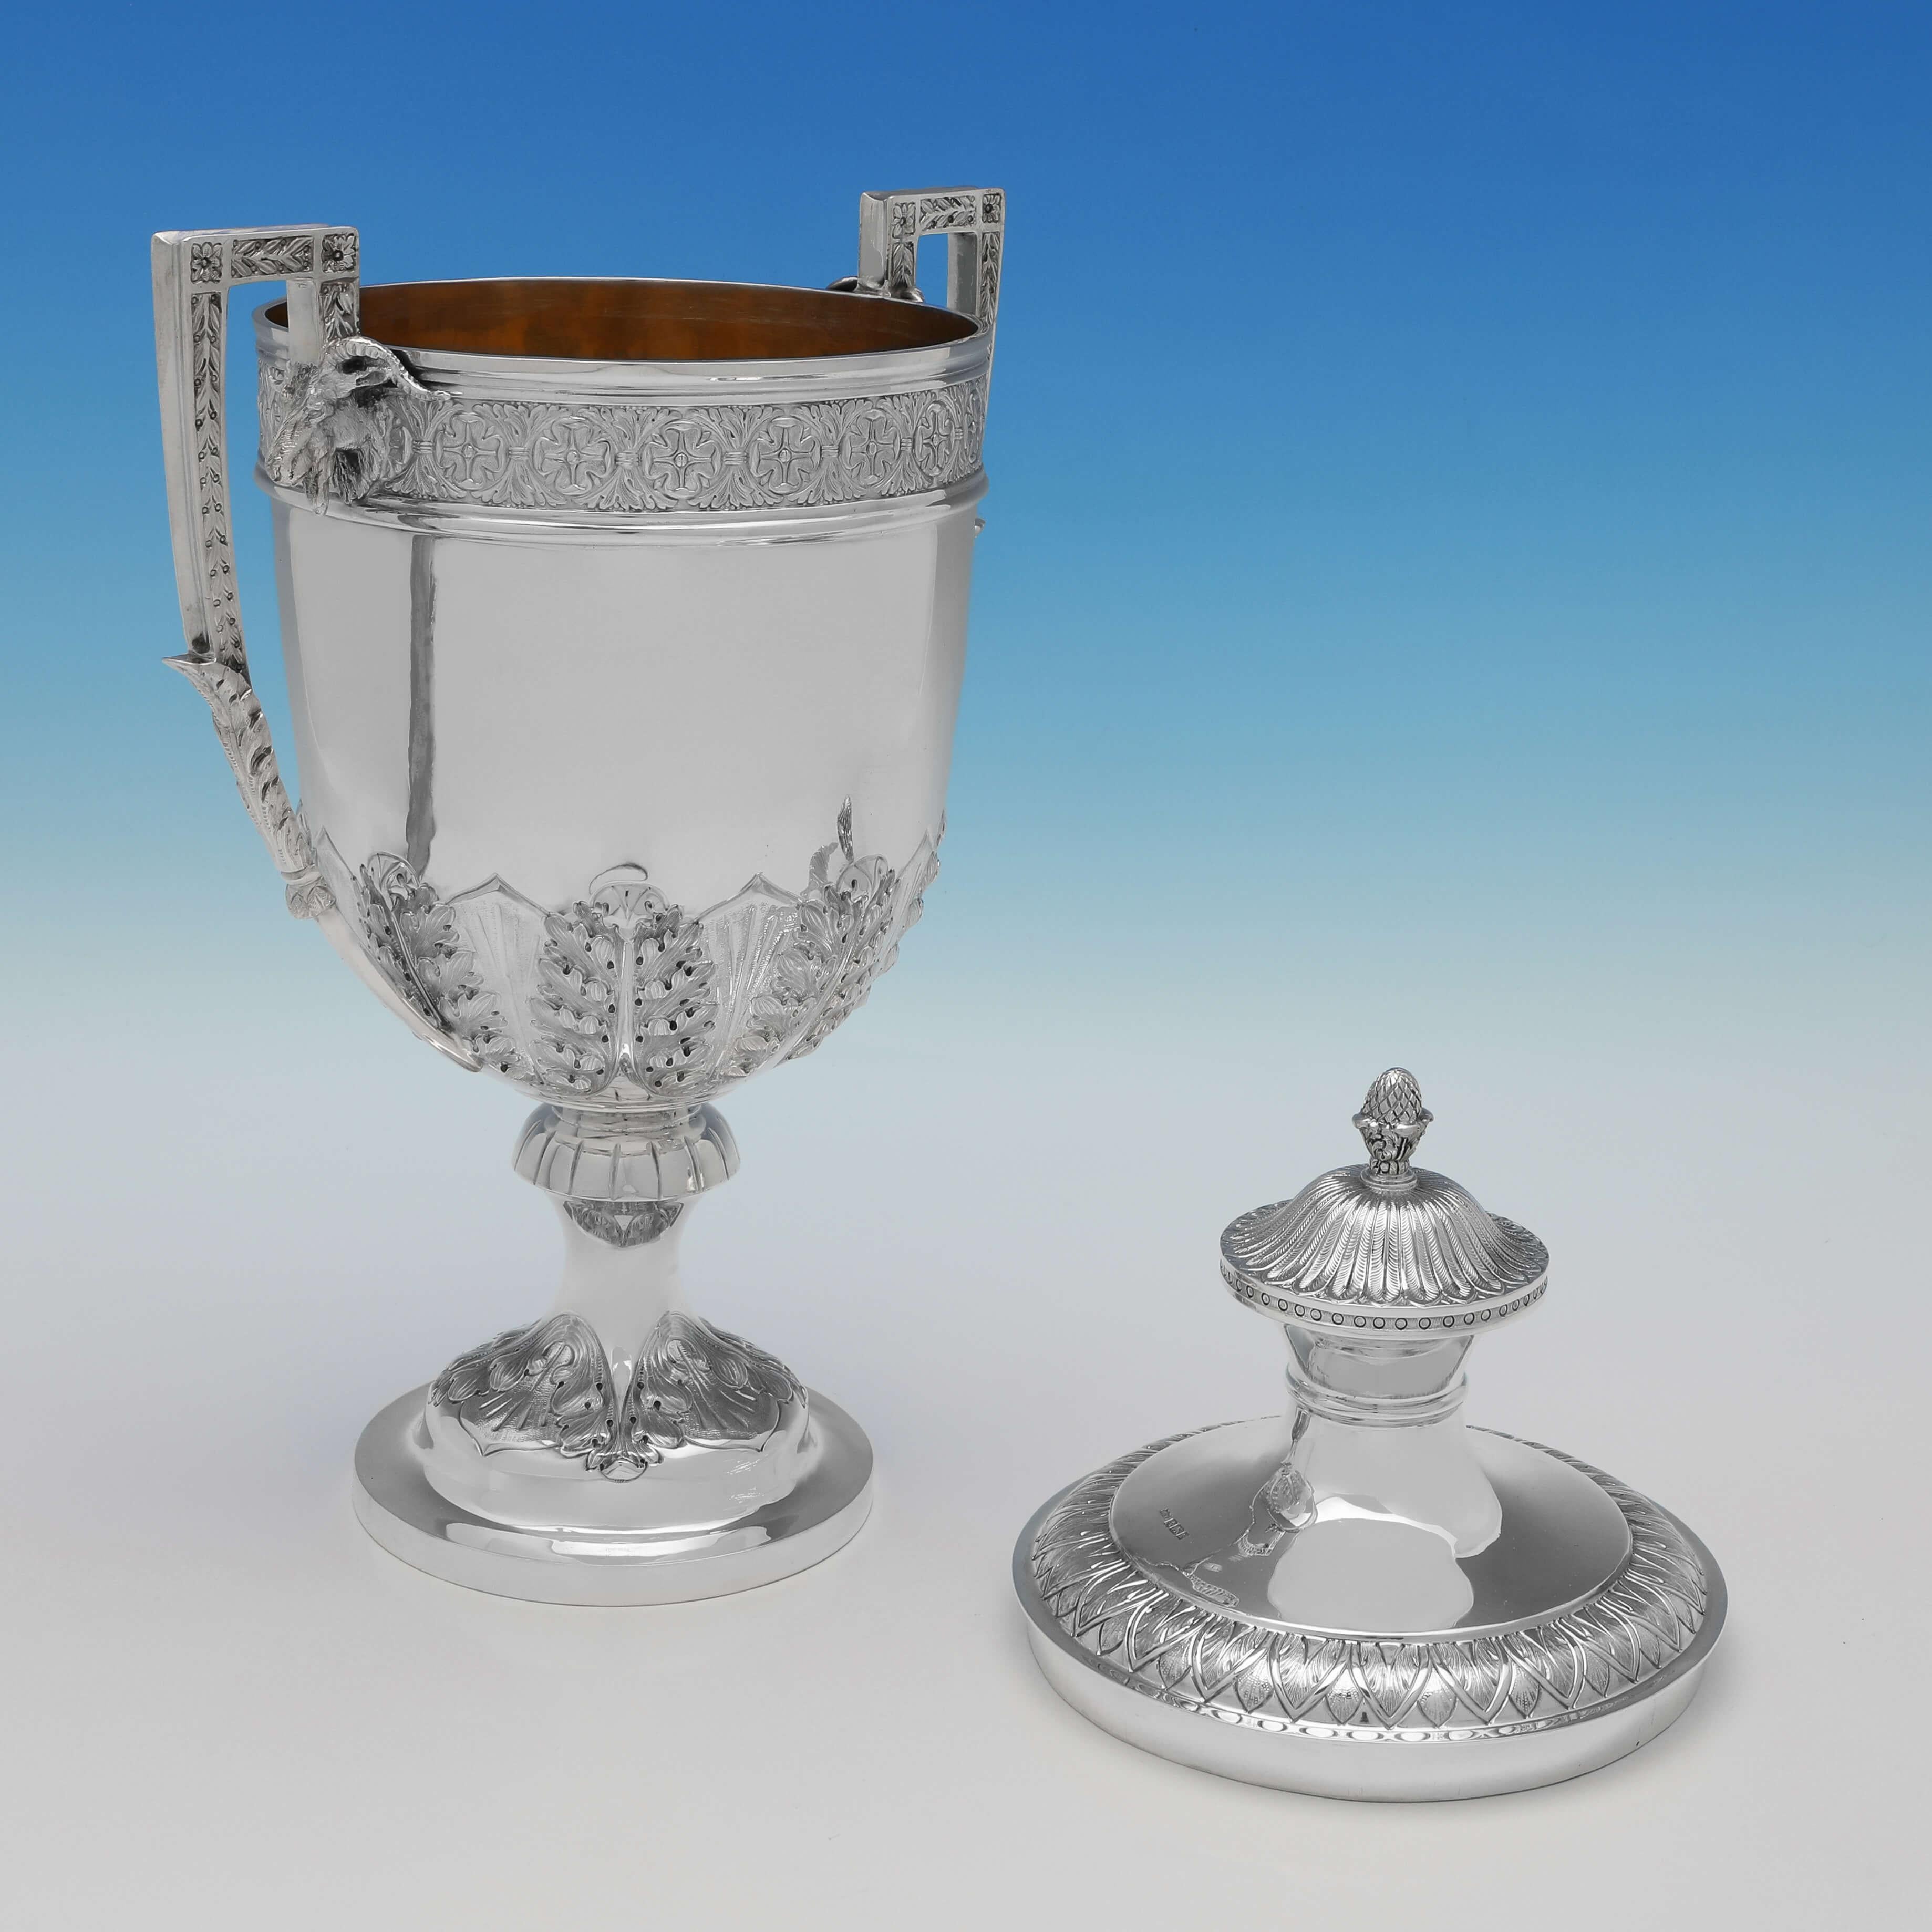 English Adam Style Antique Sterling Silver Trophy or Cup & Cover, 1902 Mappin & Webb